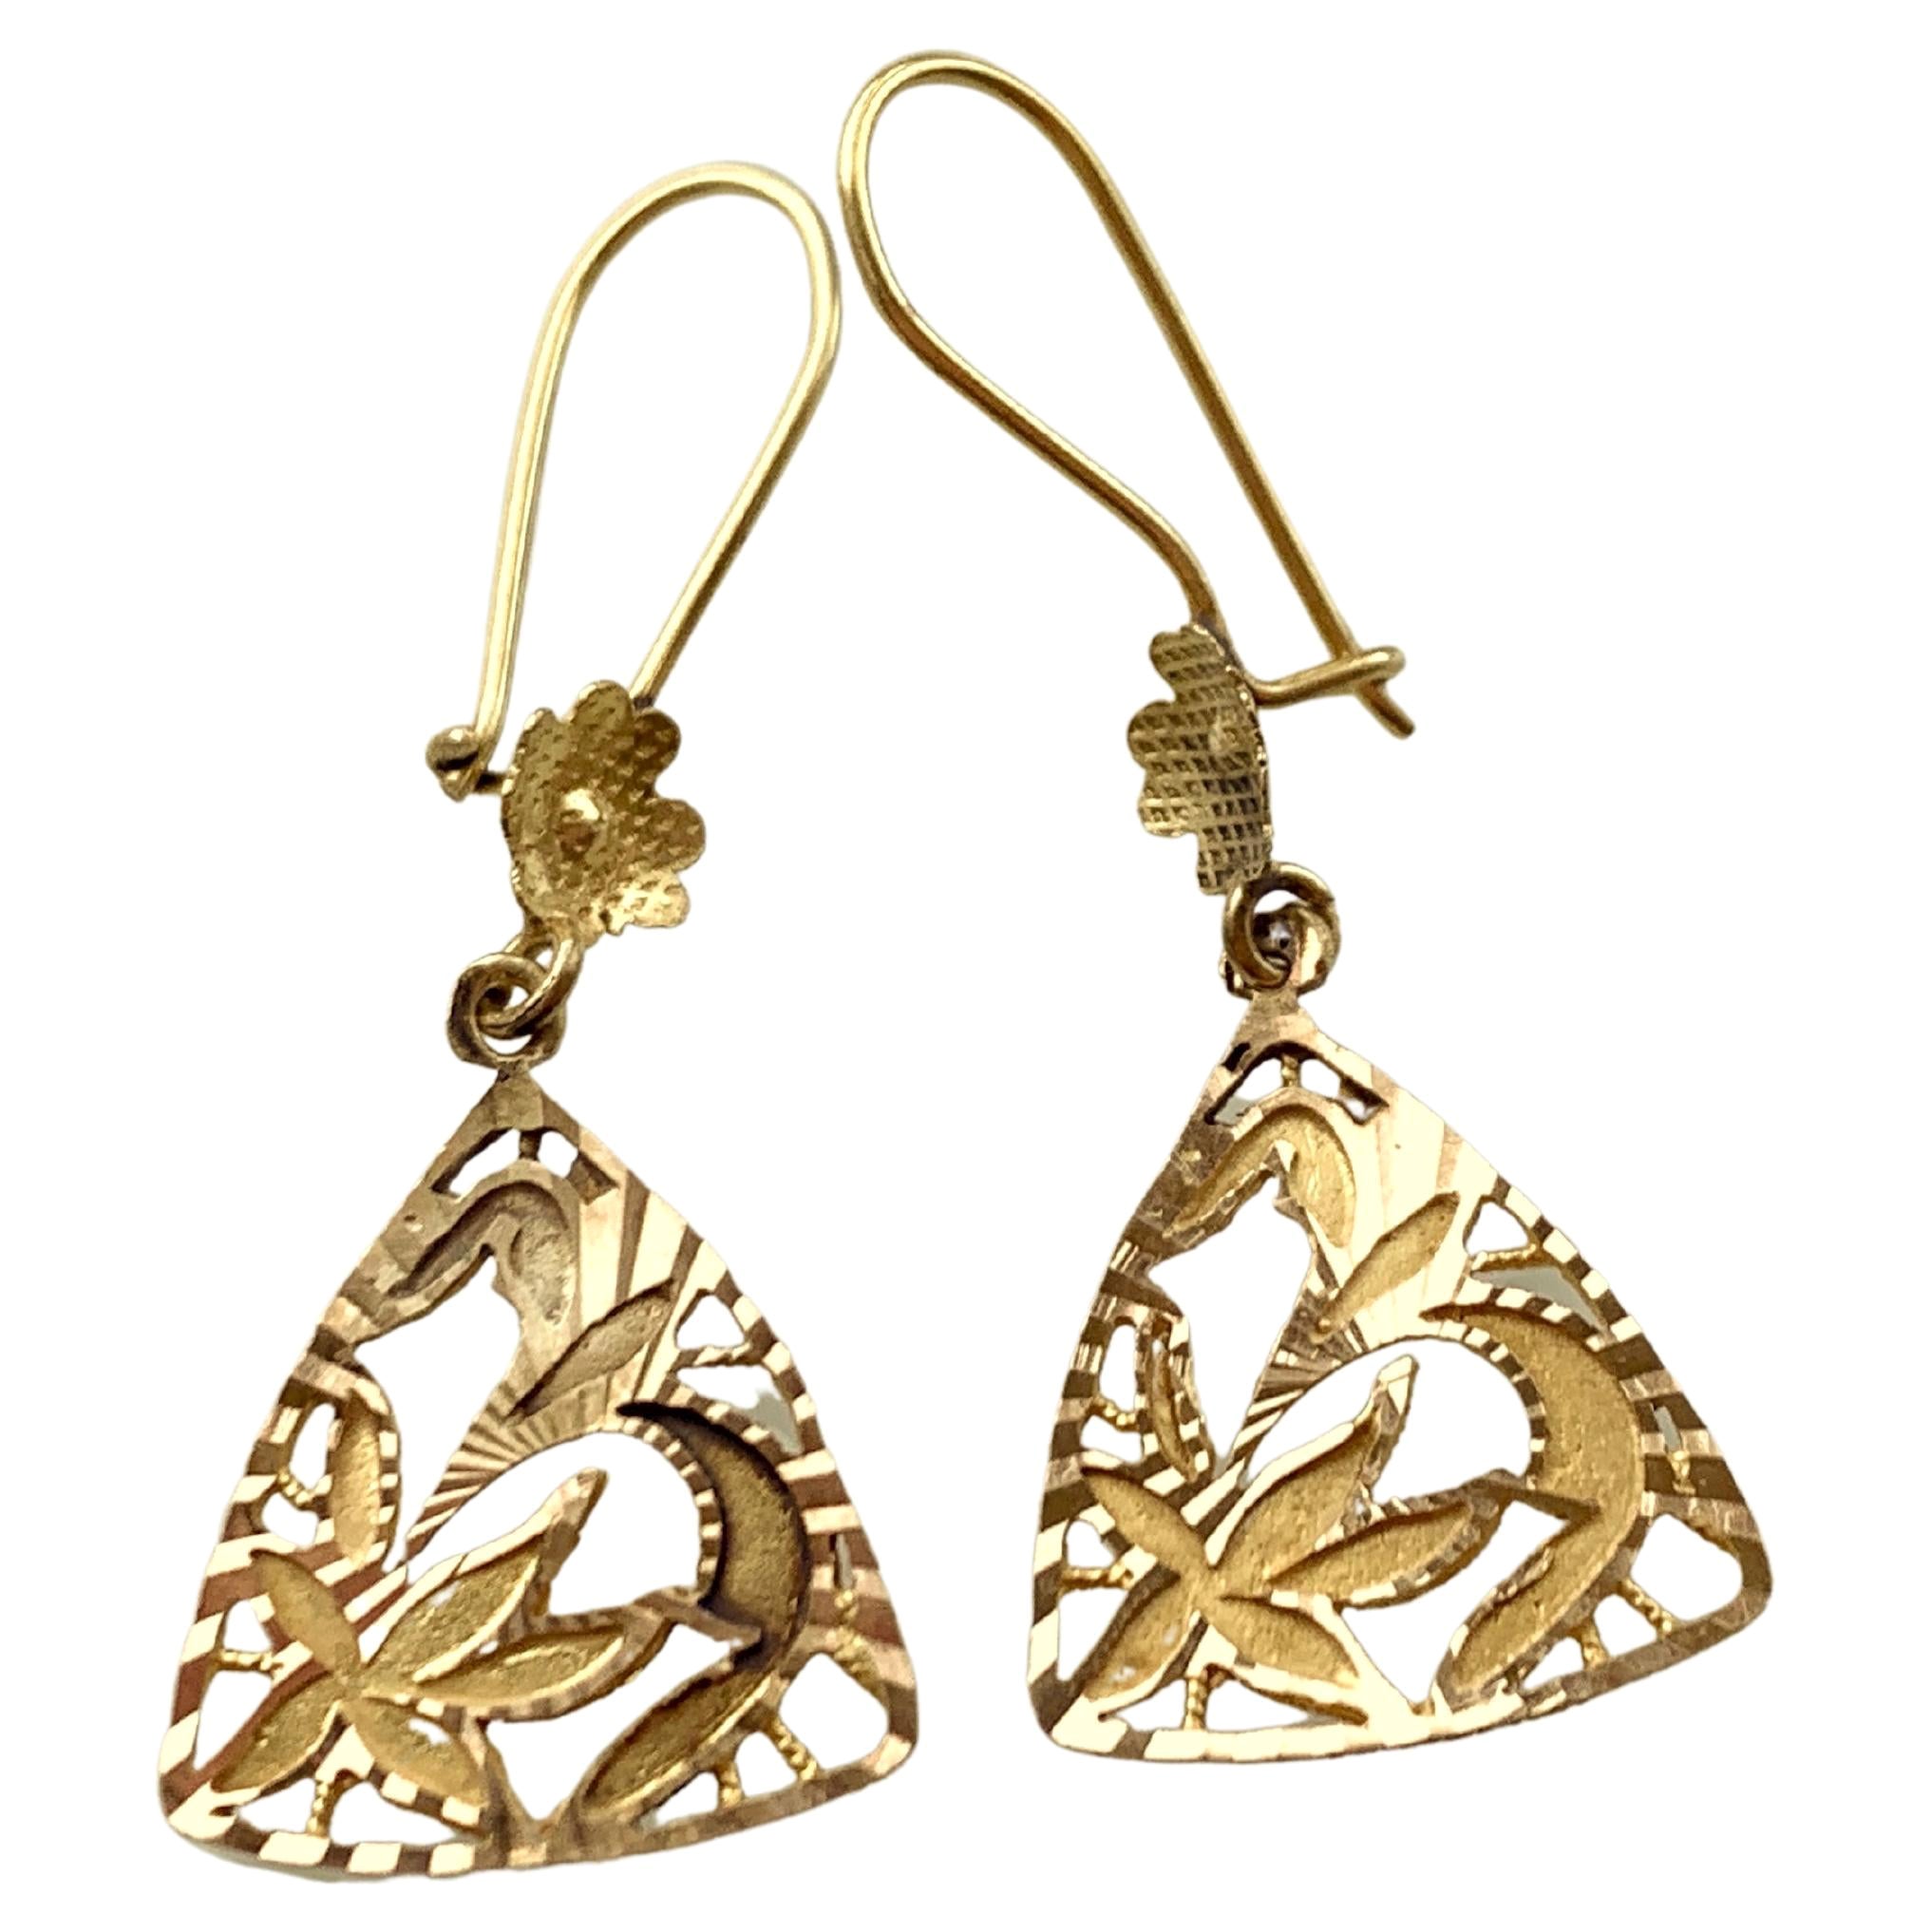 Antique 14ct Gold Earrings